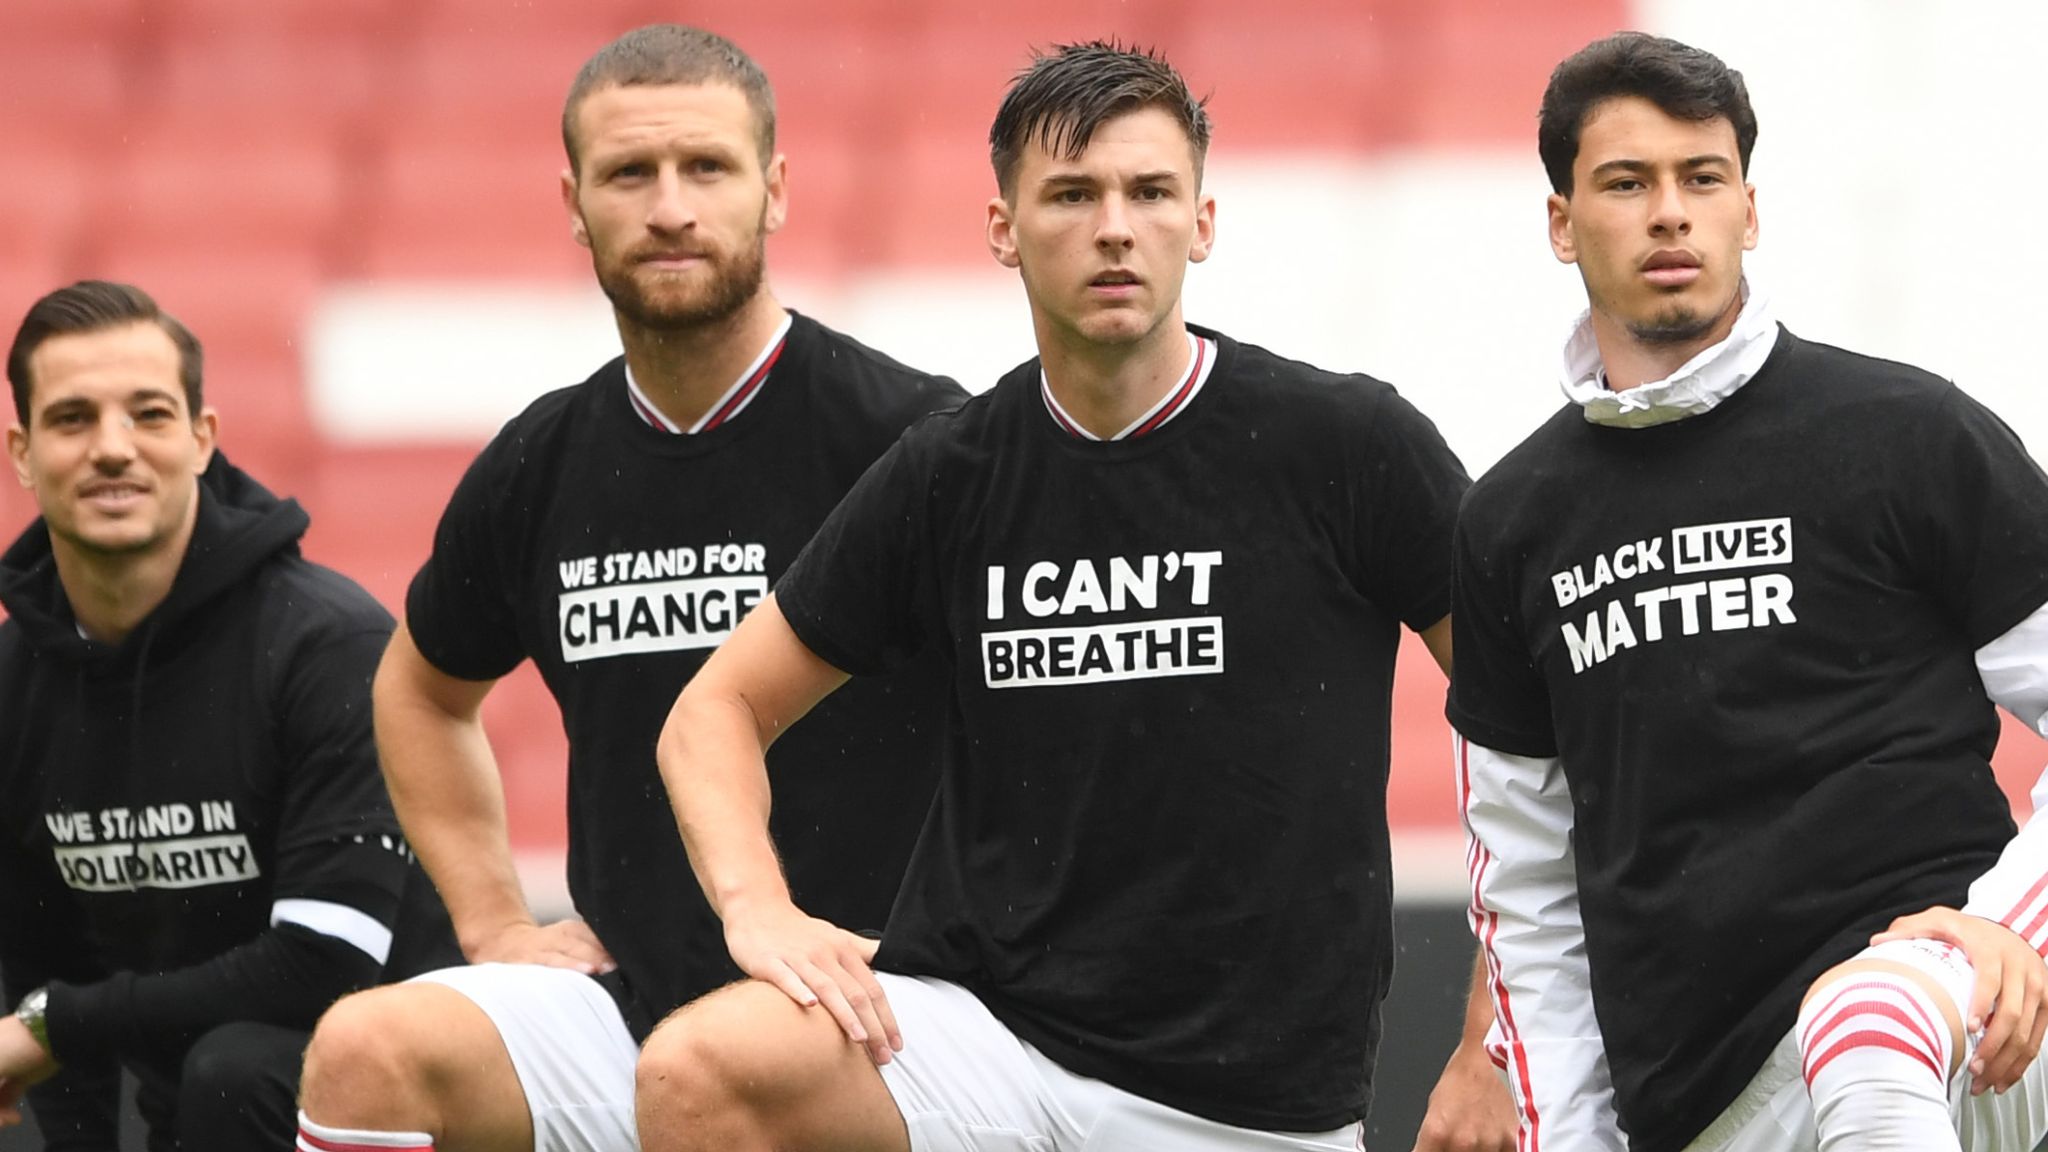 Premier League should auction off Lives Matter shirts, says Show Racism the Card | Football News |